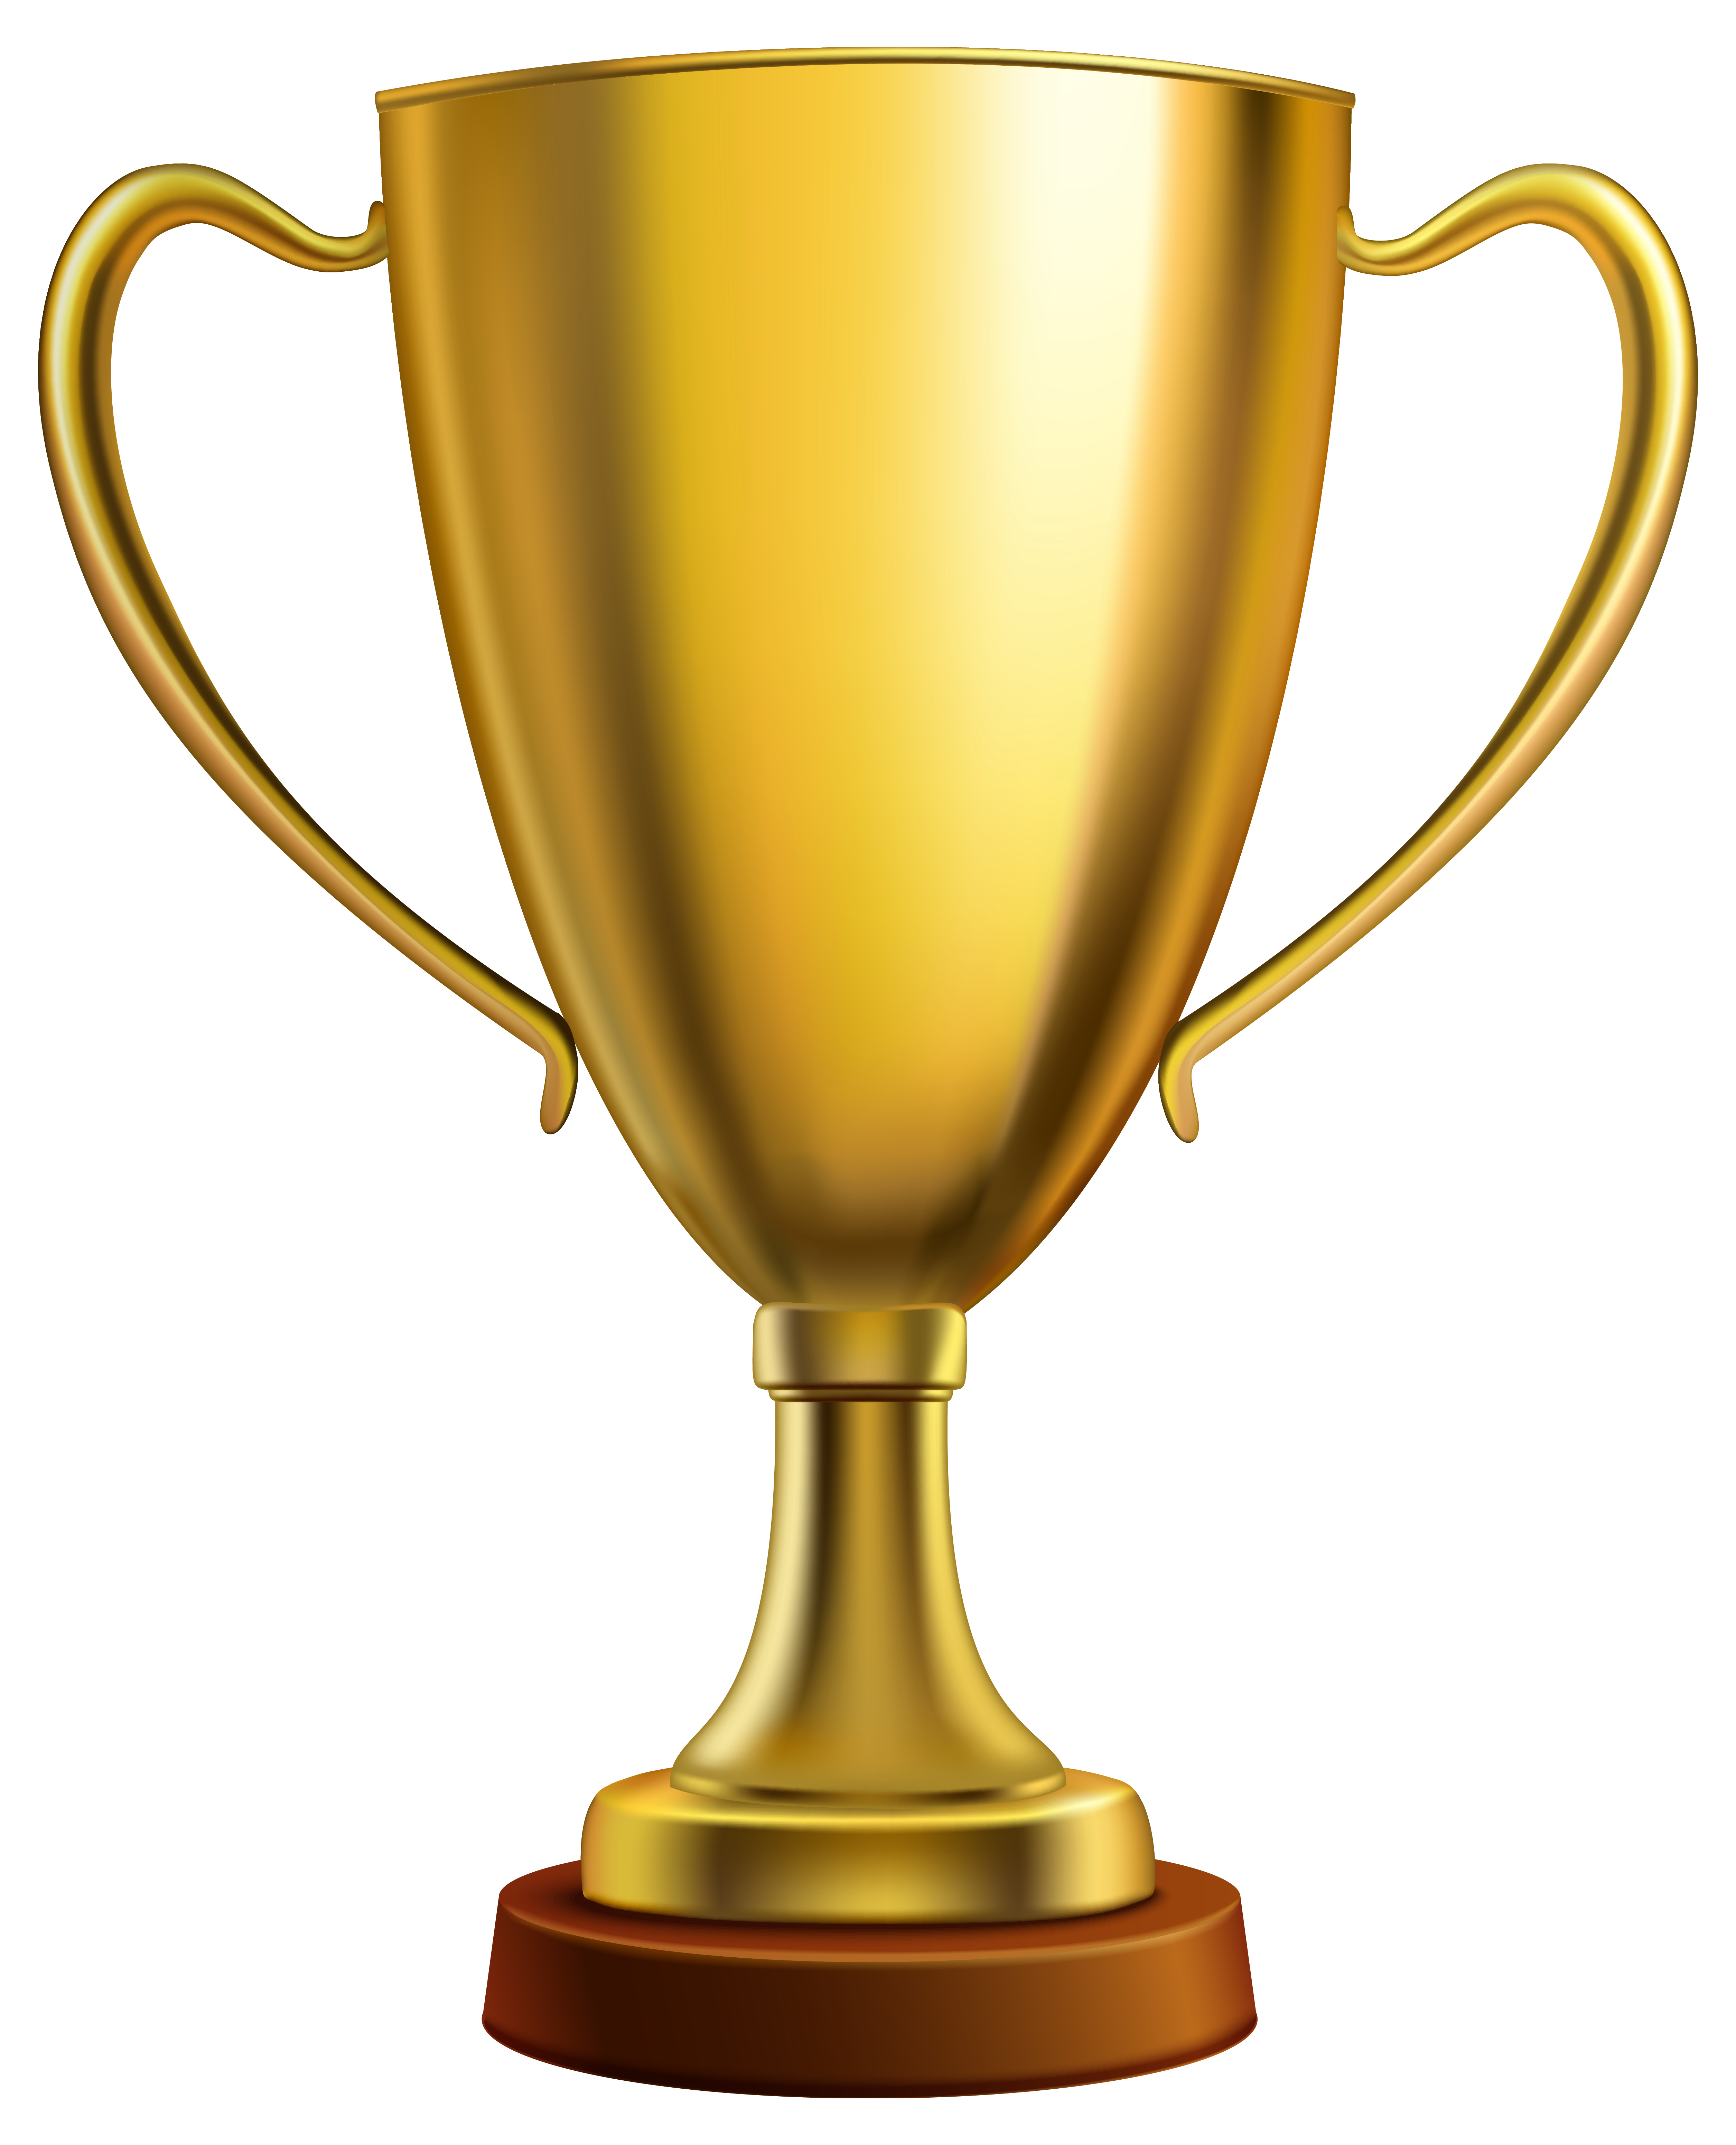 Gold cup trophy png. Clipart baseball award